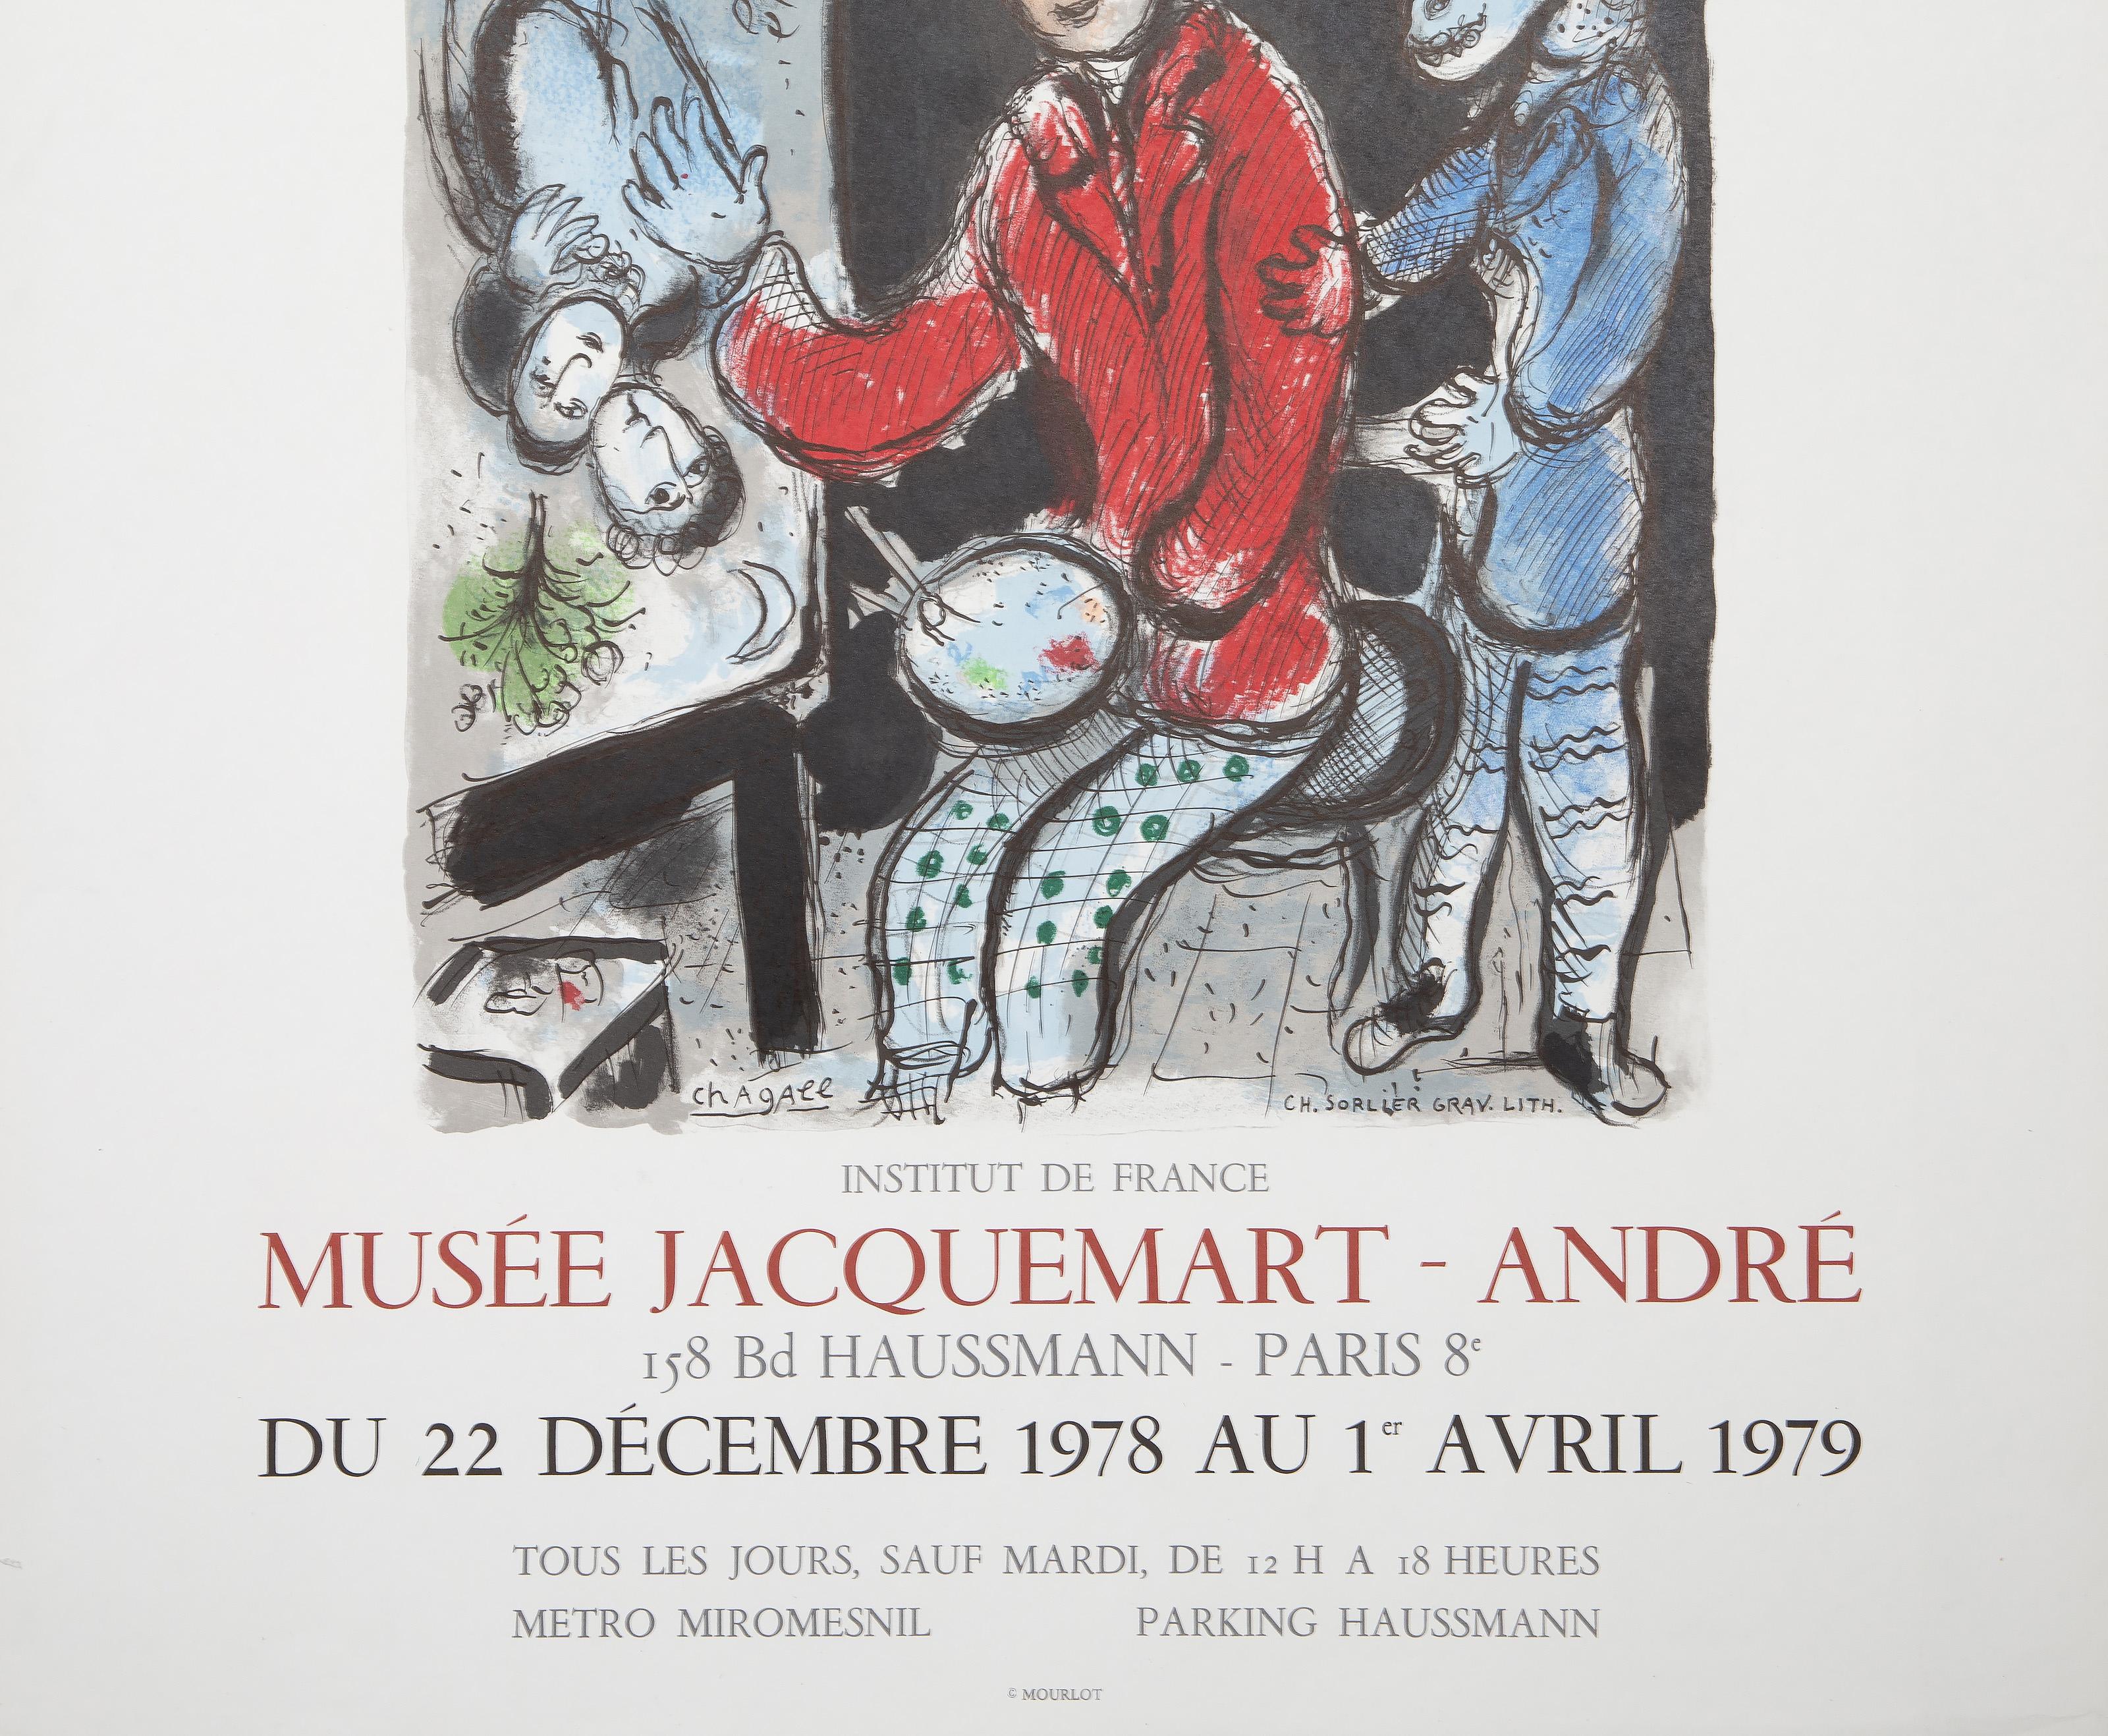 Musee Jacquemart - Andre, Lithograph Poster by Marc Chagall For Sale 2